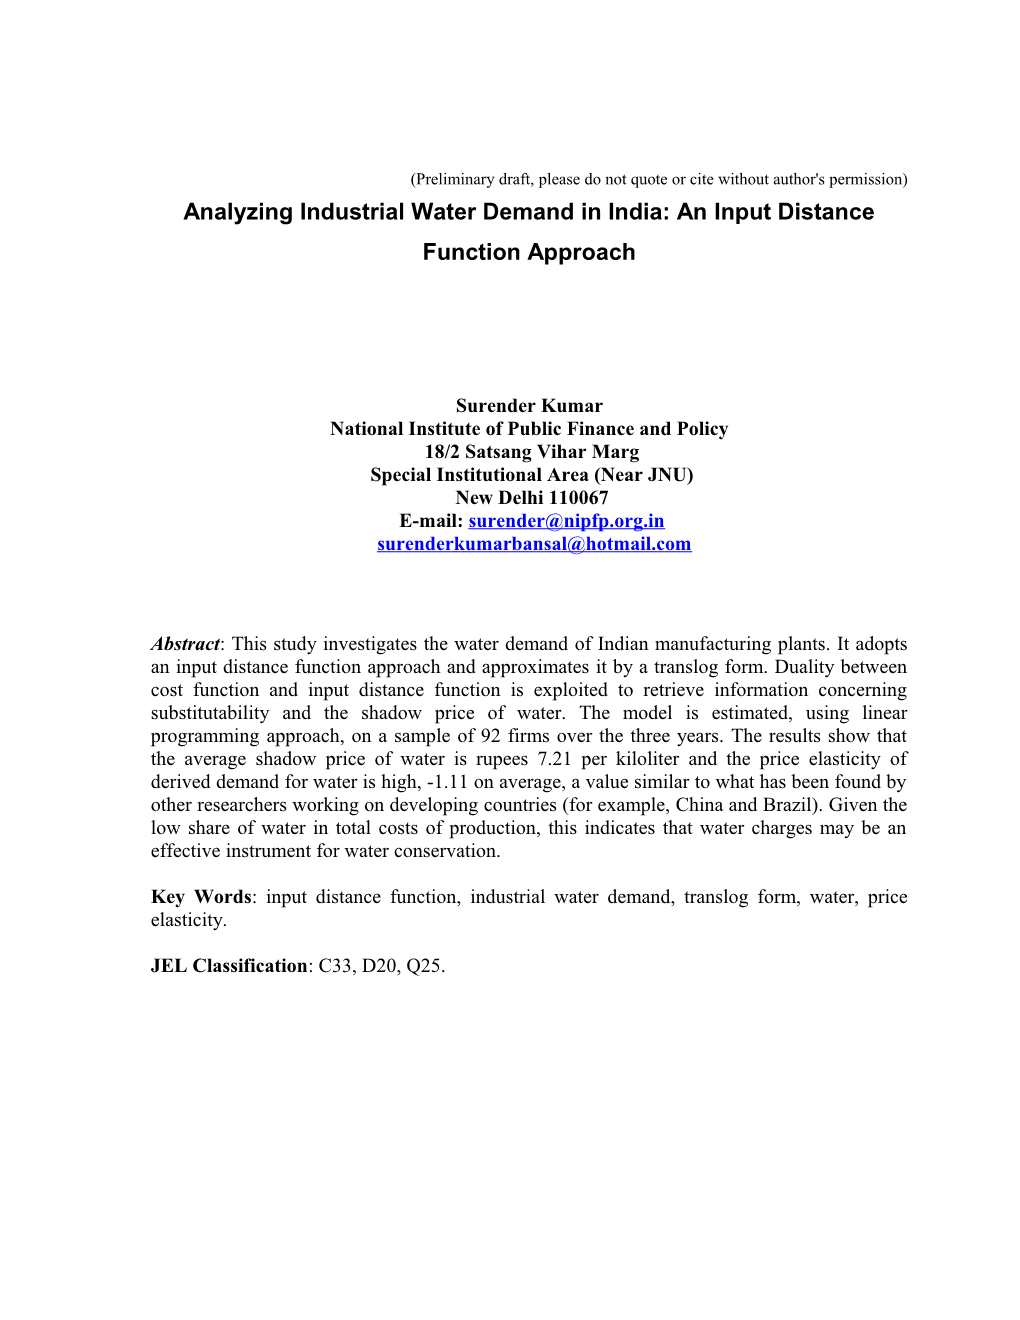 An Analysis of Industrial Water Demand in India: an Input Distance Function Approach